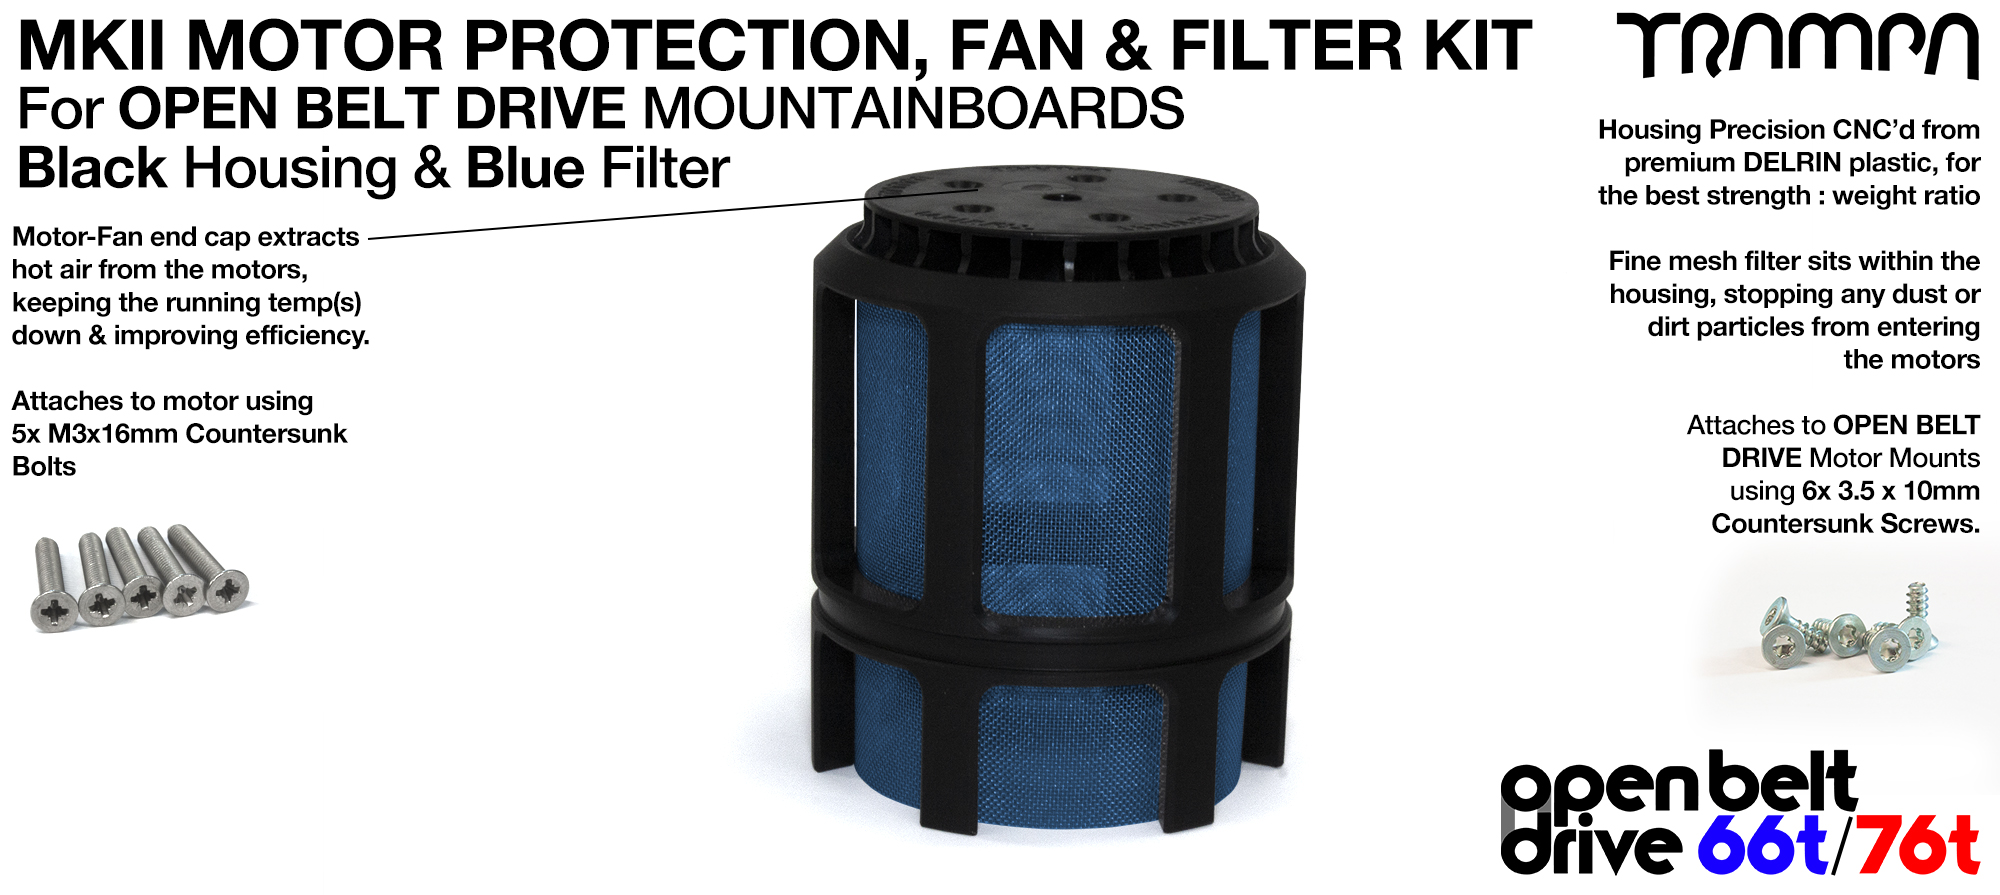 1x OBD MKII Motor protection Sleeve with BLUE Filter